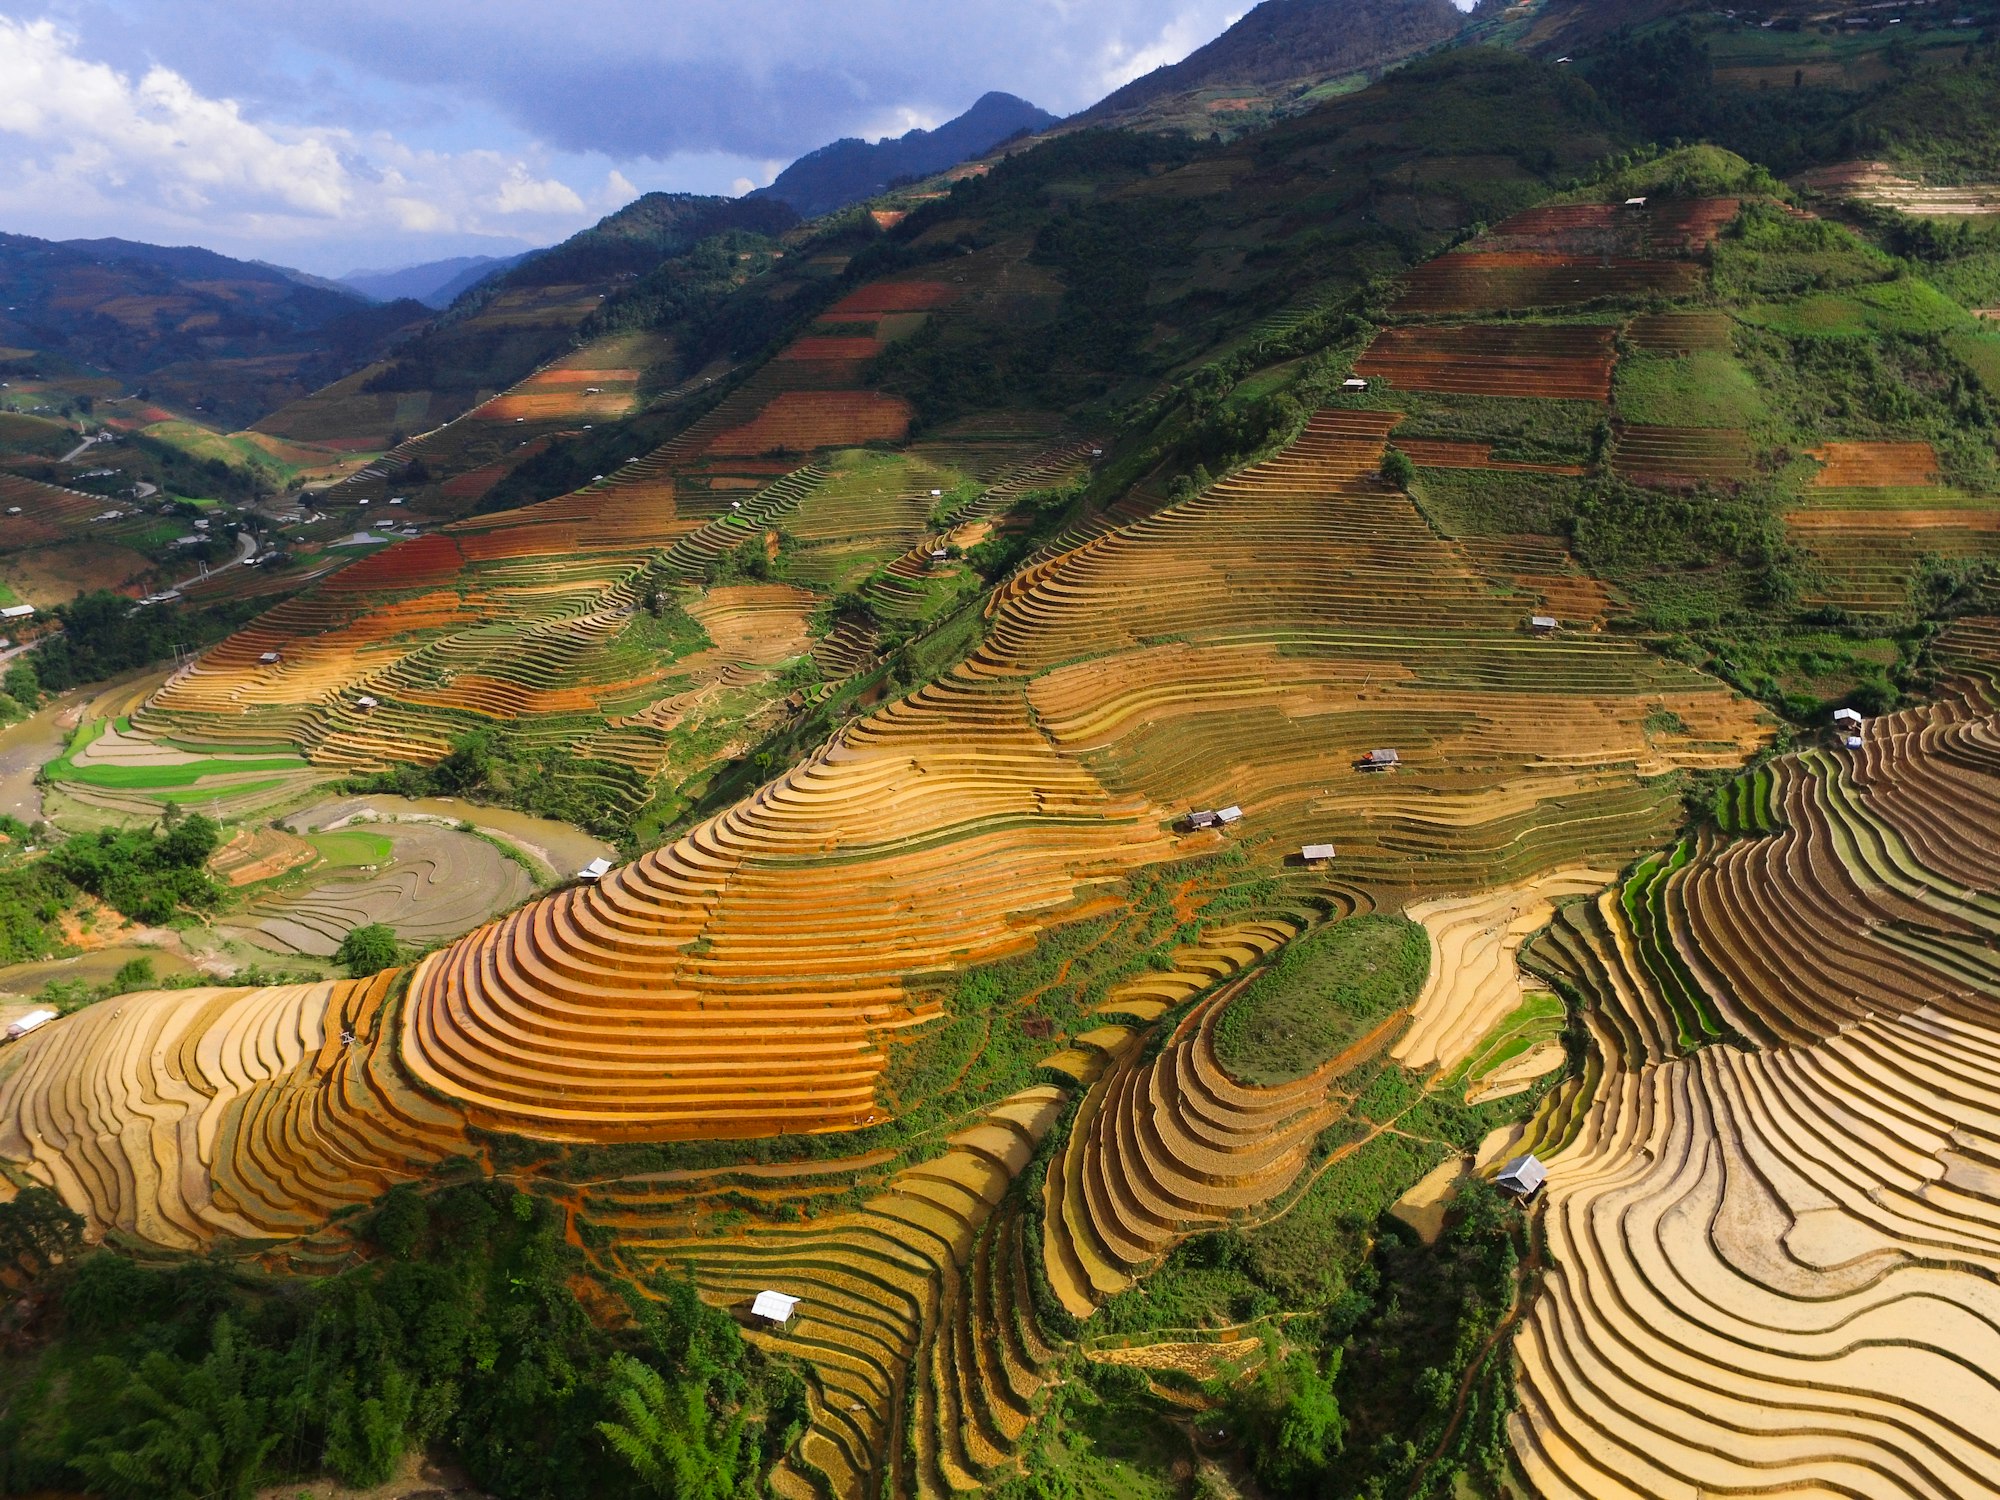 This is photo I taken in Che Cu Nha commune, one of the places with the most beautiful terraces in Vietnam my Country